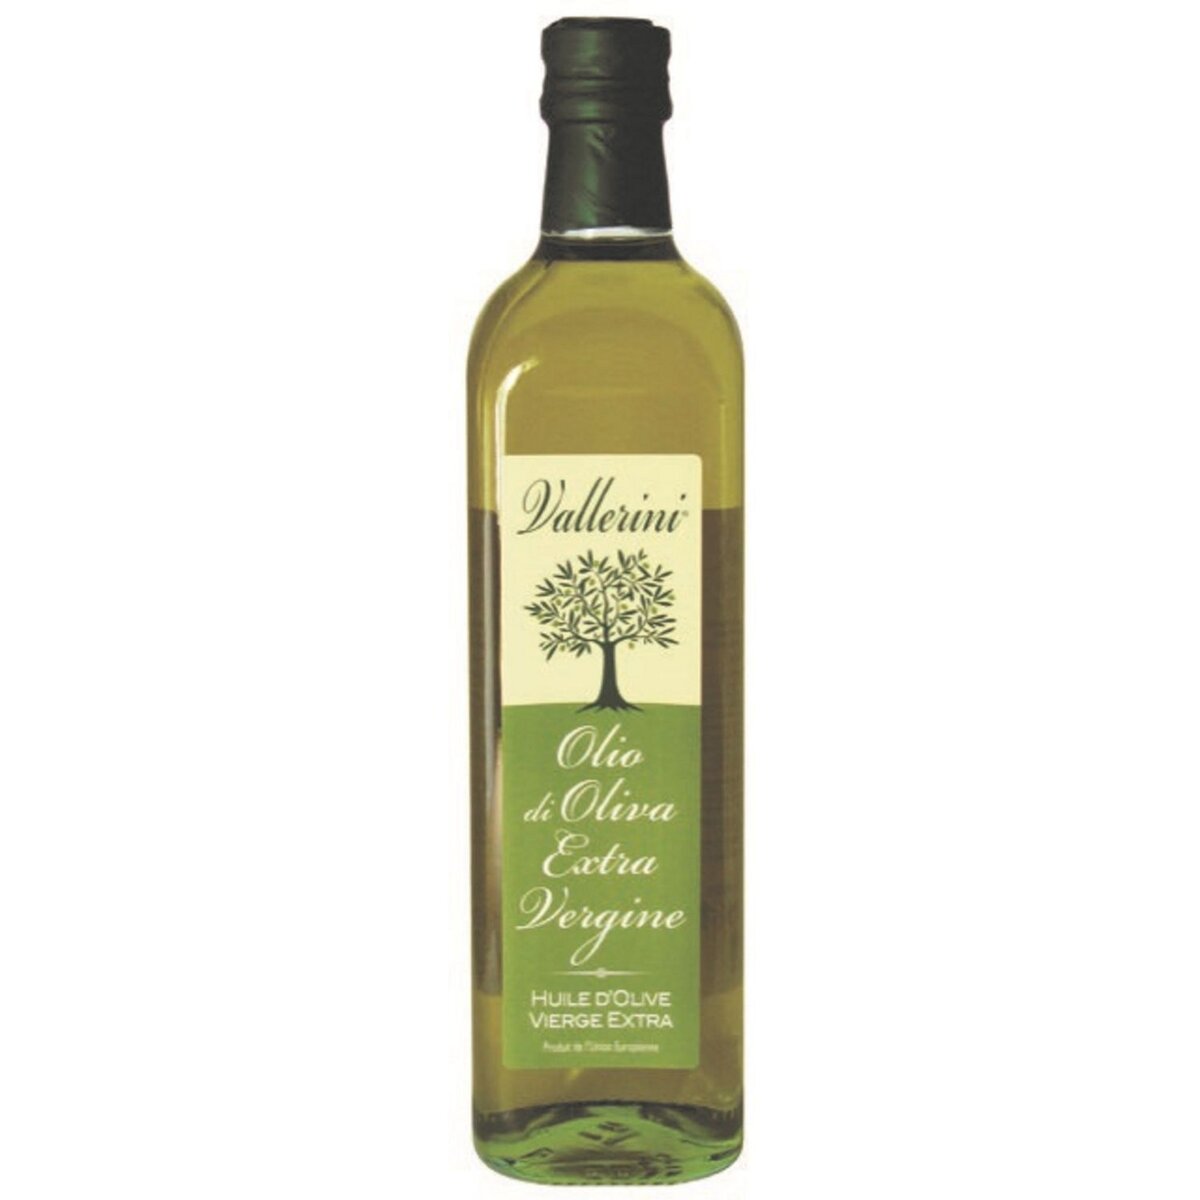 Vallerini huile d'olive vierge extra 75cl